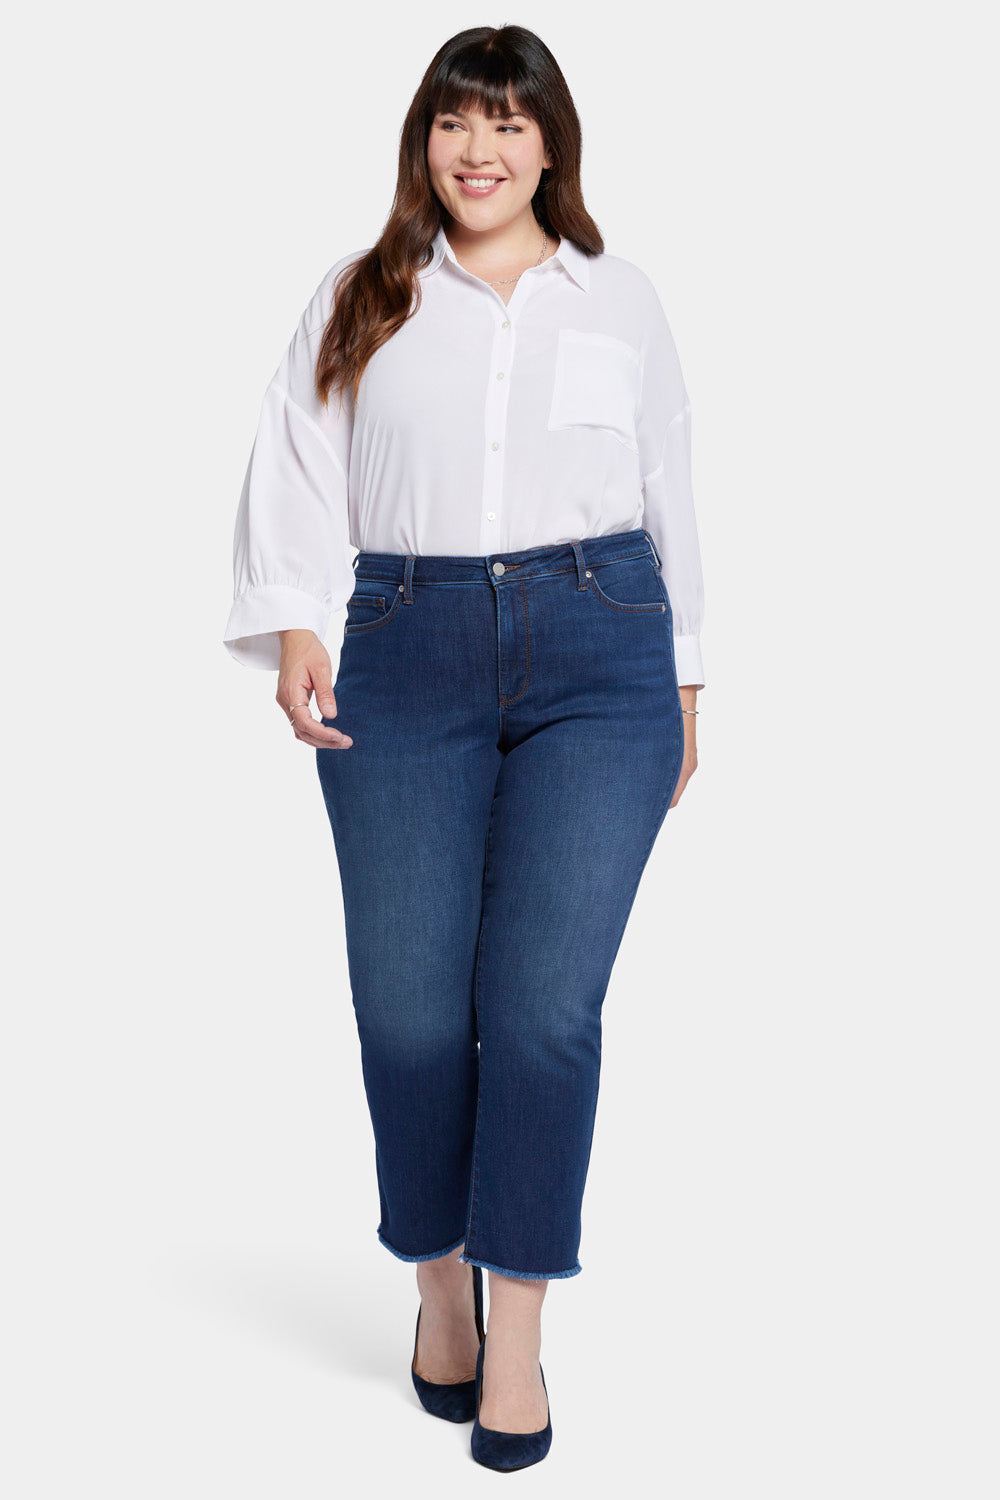 NYDJ Barbara Bootcut Ankle Jeans In Plus Size With Frayed Hems - Gold Coast